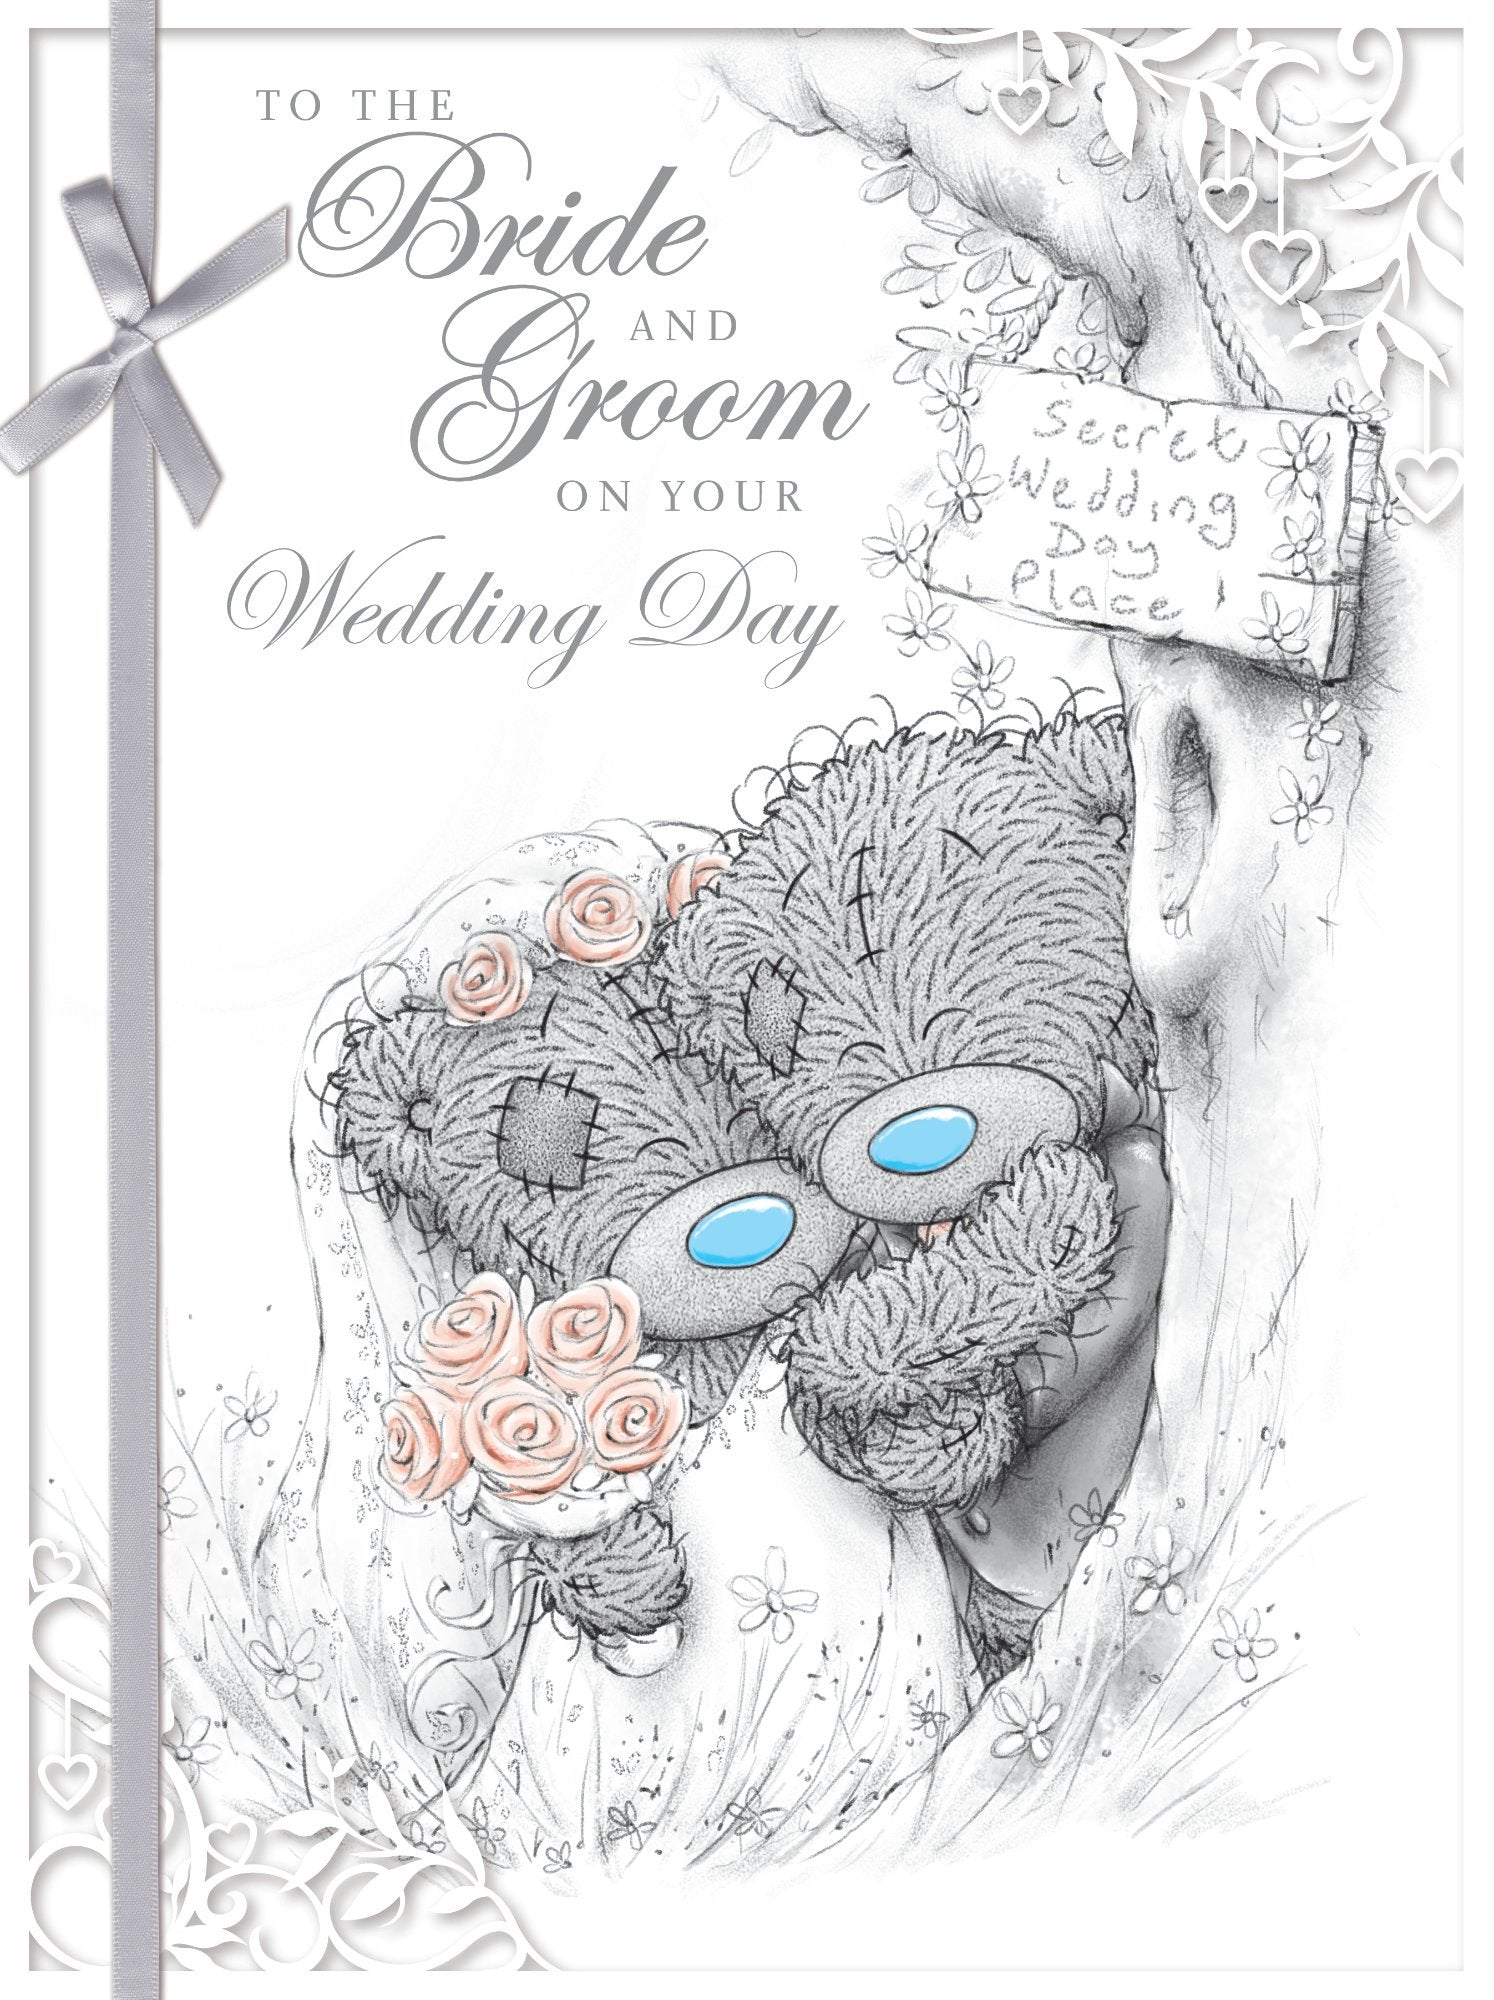 Photograph of Wedding Day Bride & Groom Greetings Card at Nicole's Shop